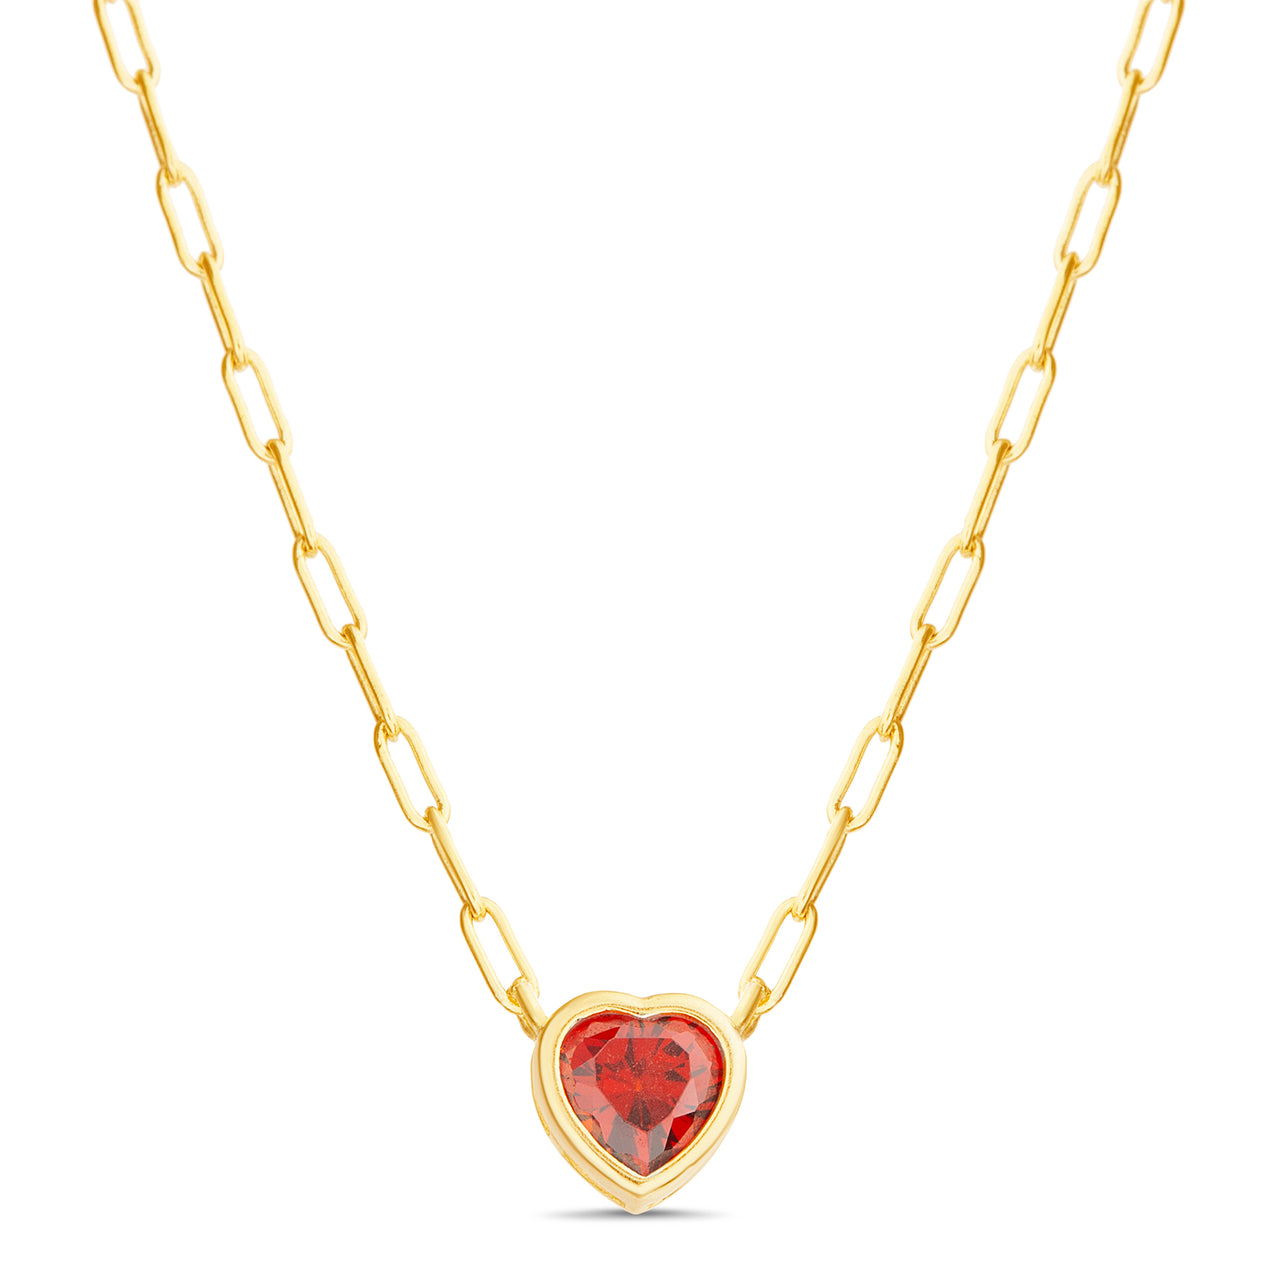 Lesa Michele Heart Pendant Red Cubic Zirconia Necklace in Yellow Gold Plated Sterling Silver